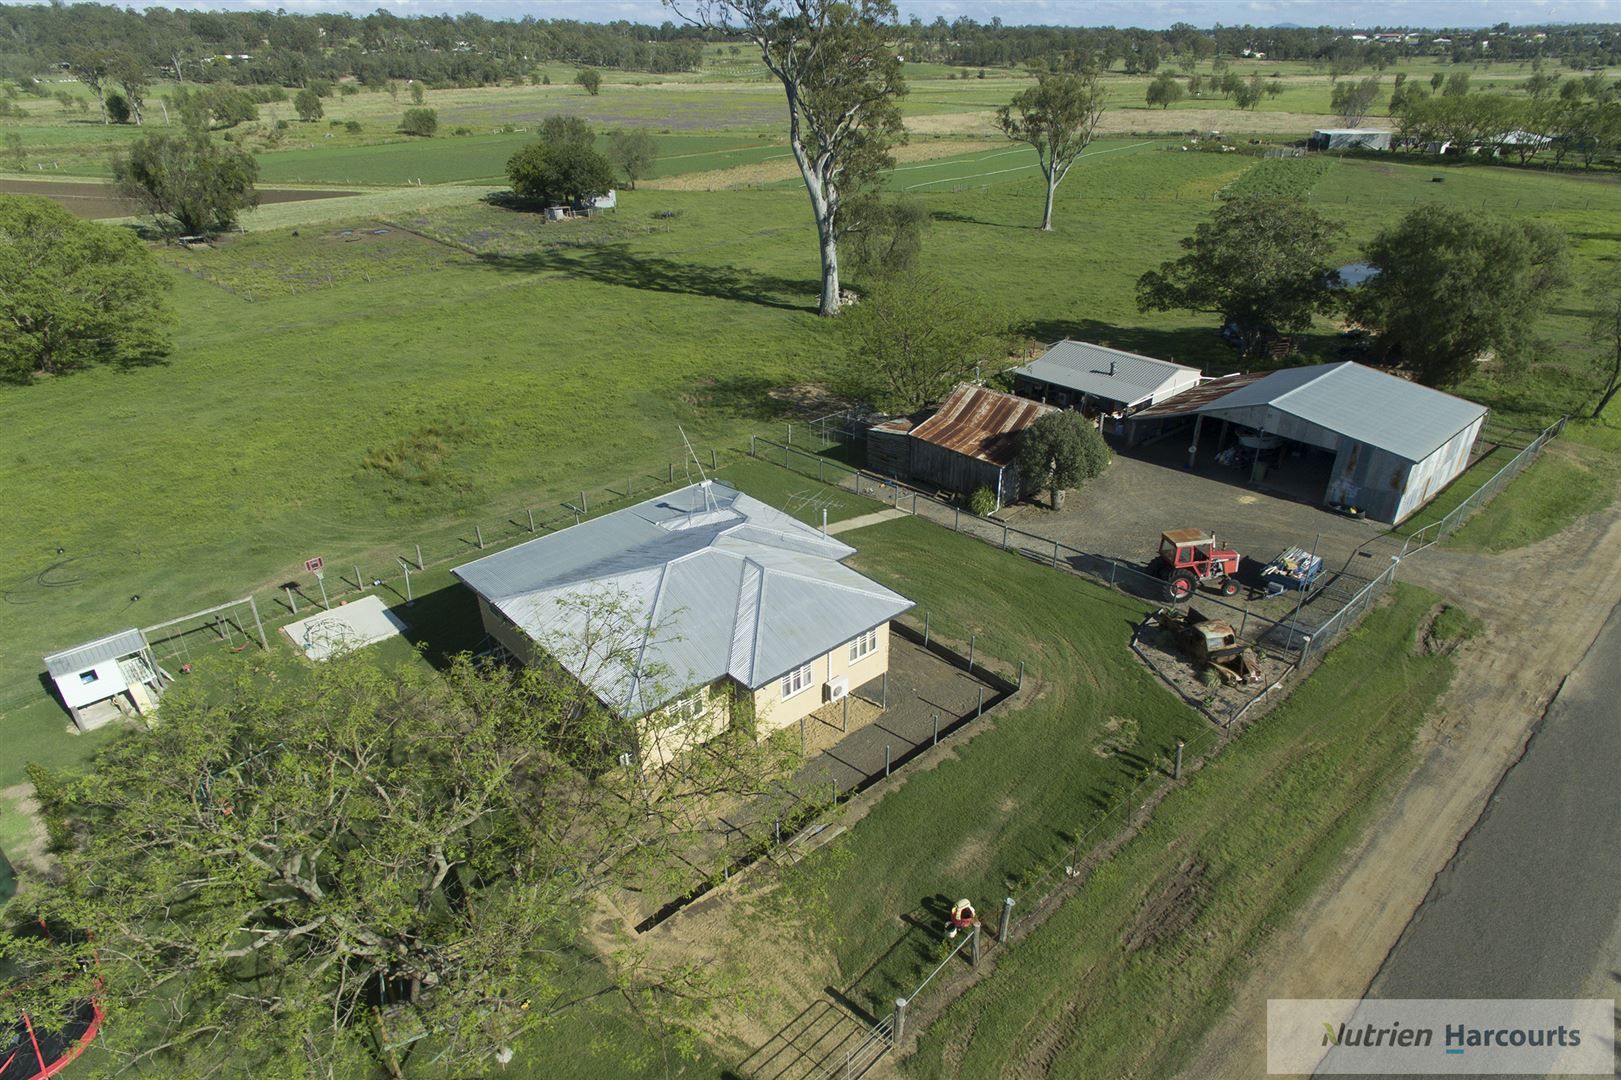 5 bedrooms Farm in 33Hatton Vale Heise Road HATTON VALE QLD, 4341